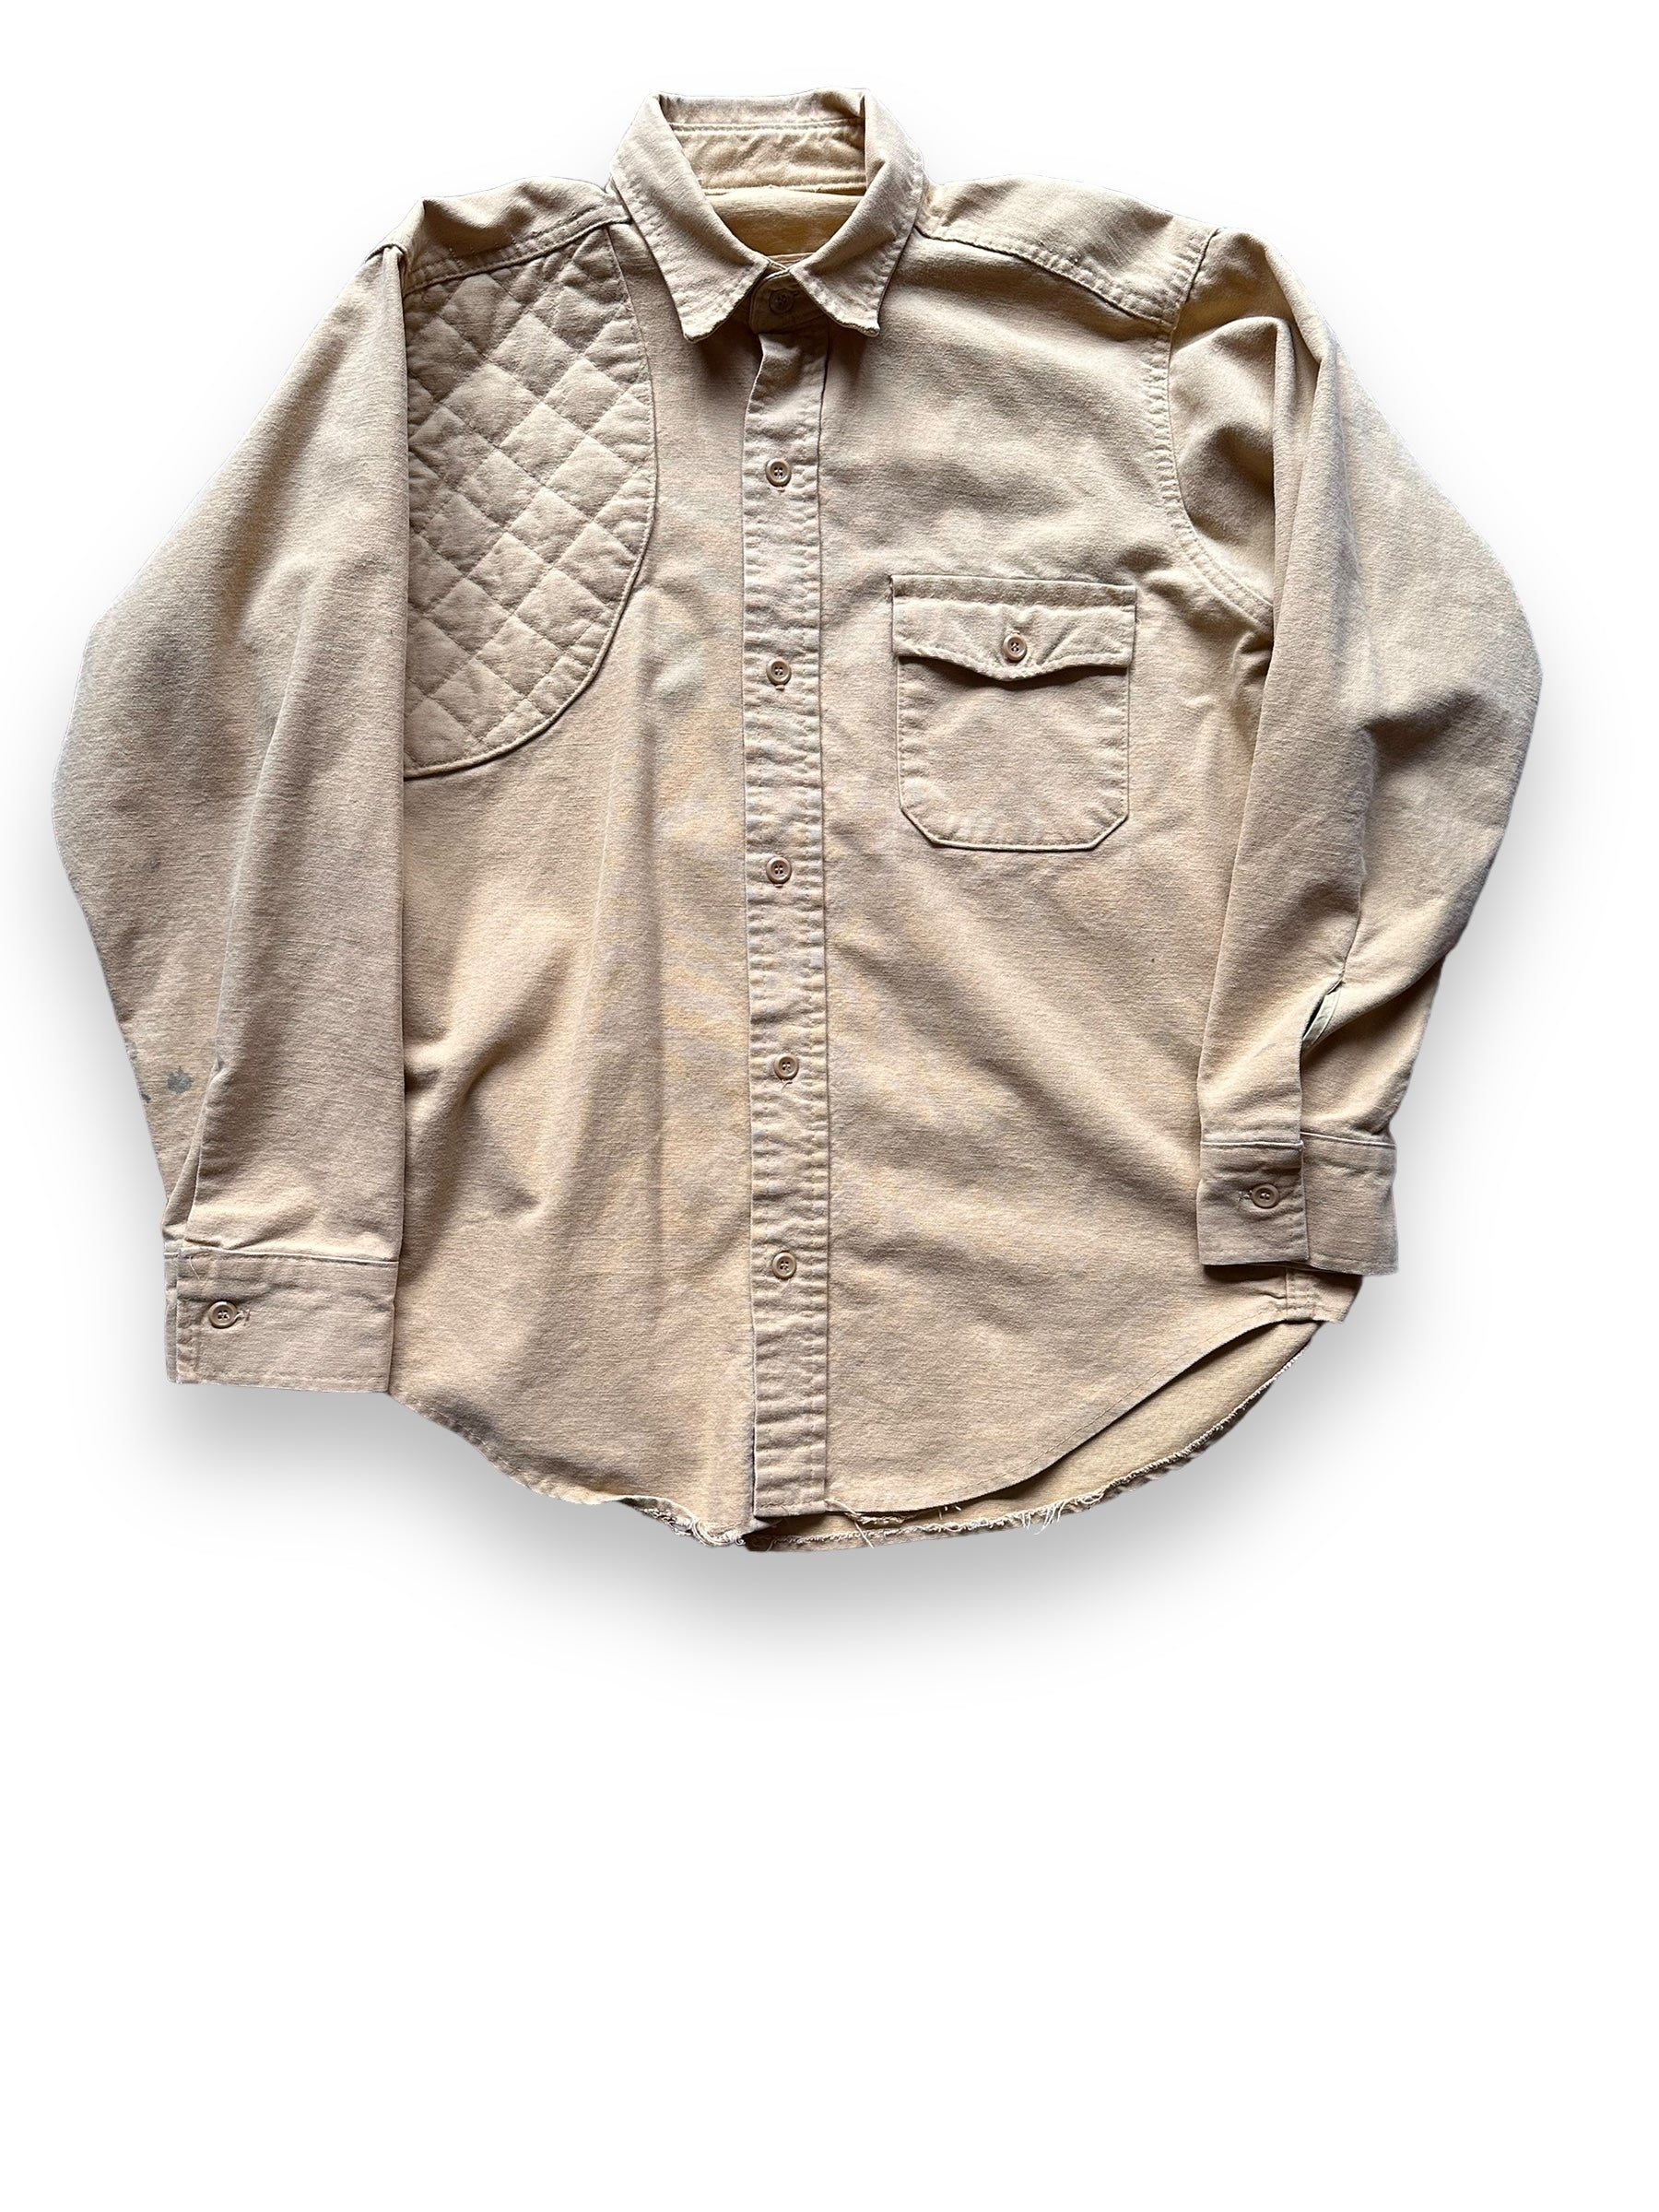 Front View of Vintage Chamois Shooting Shirt SZ L |  Barn Owl Vintage Goods | Vintage Workwear Seattle